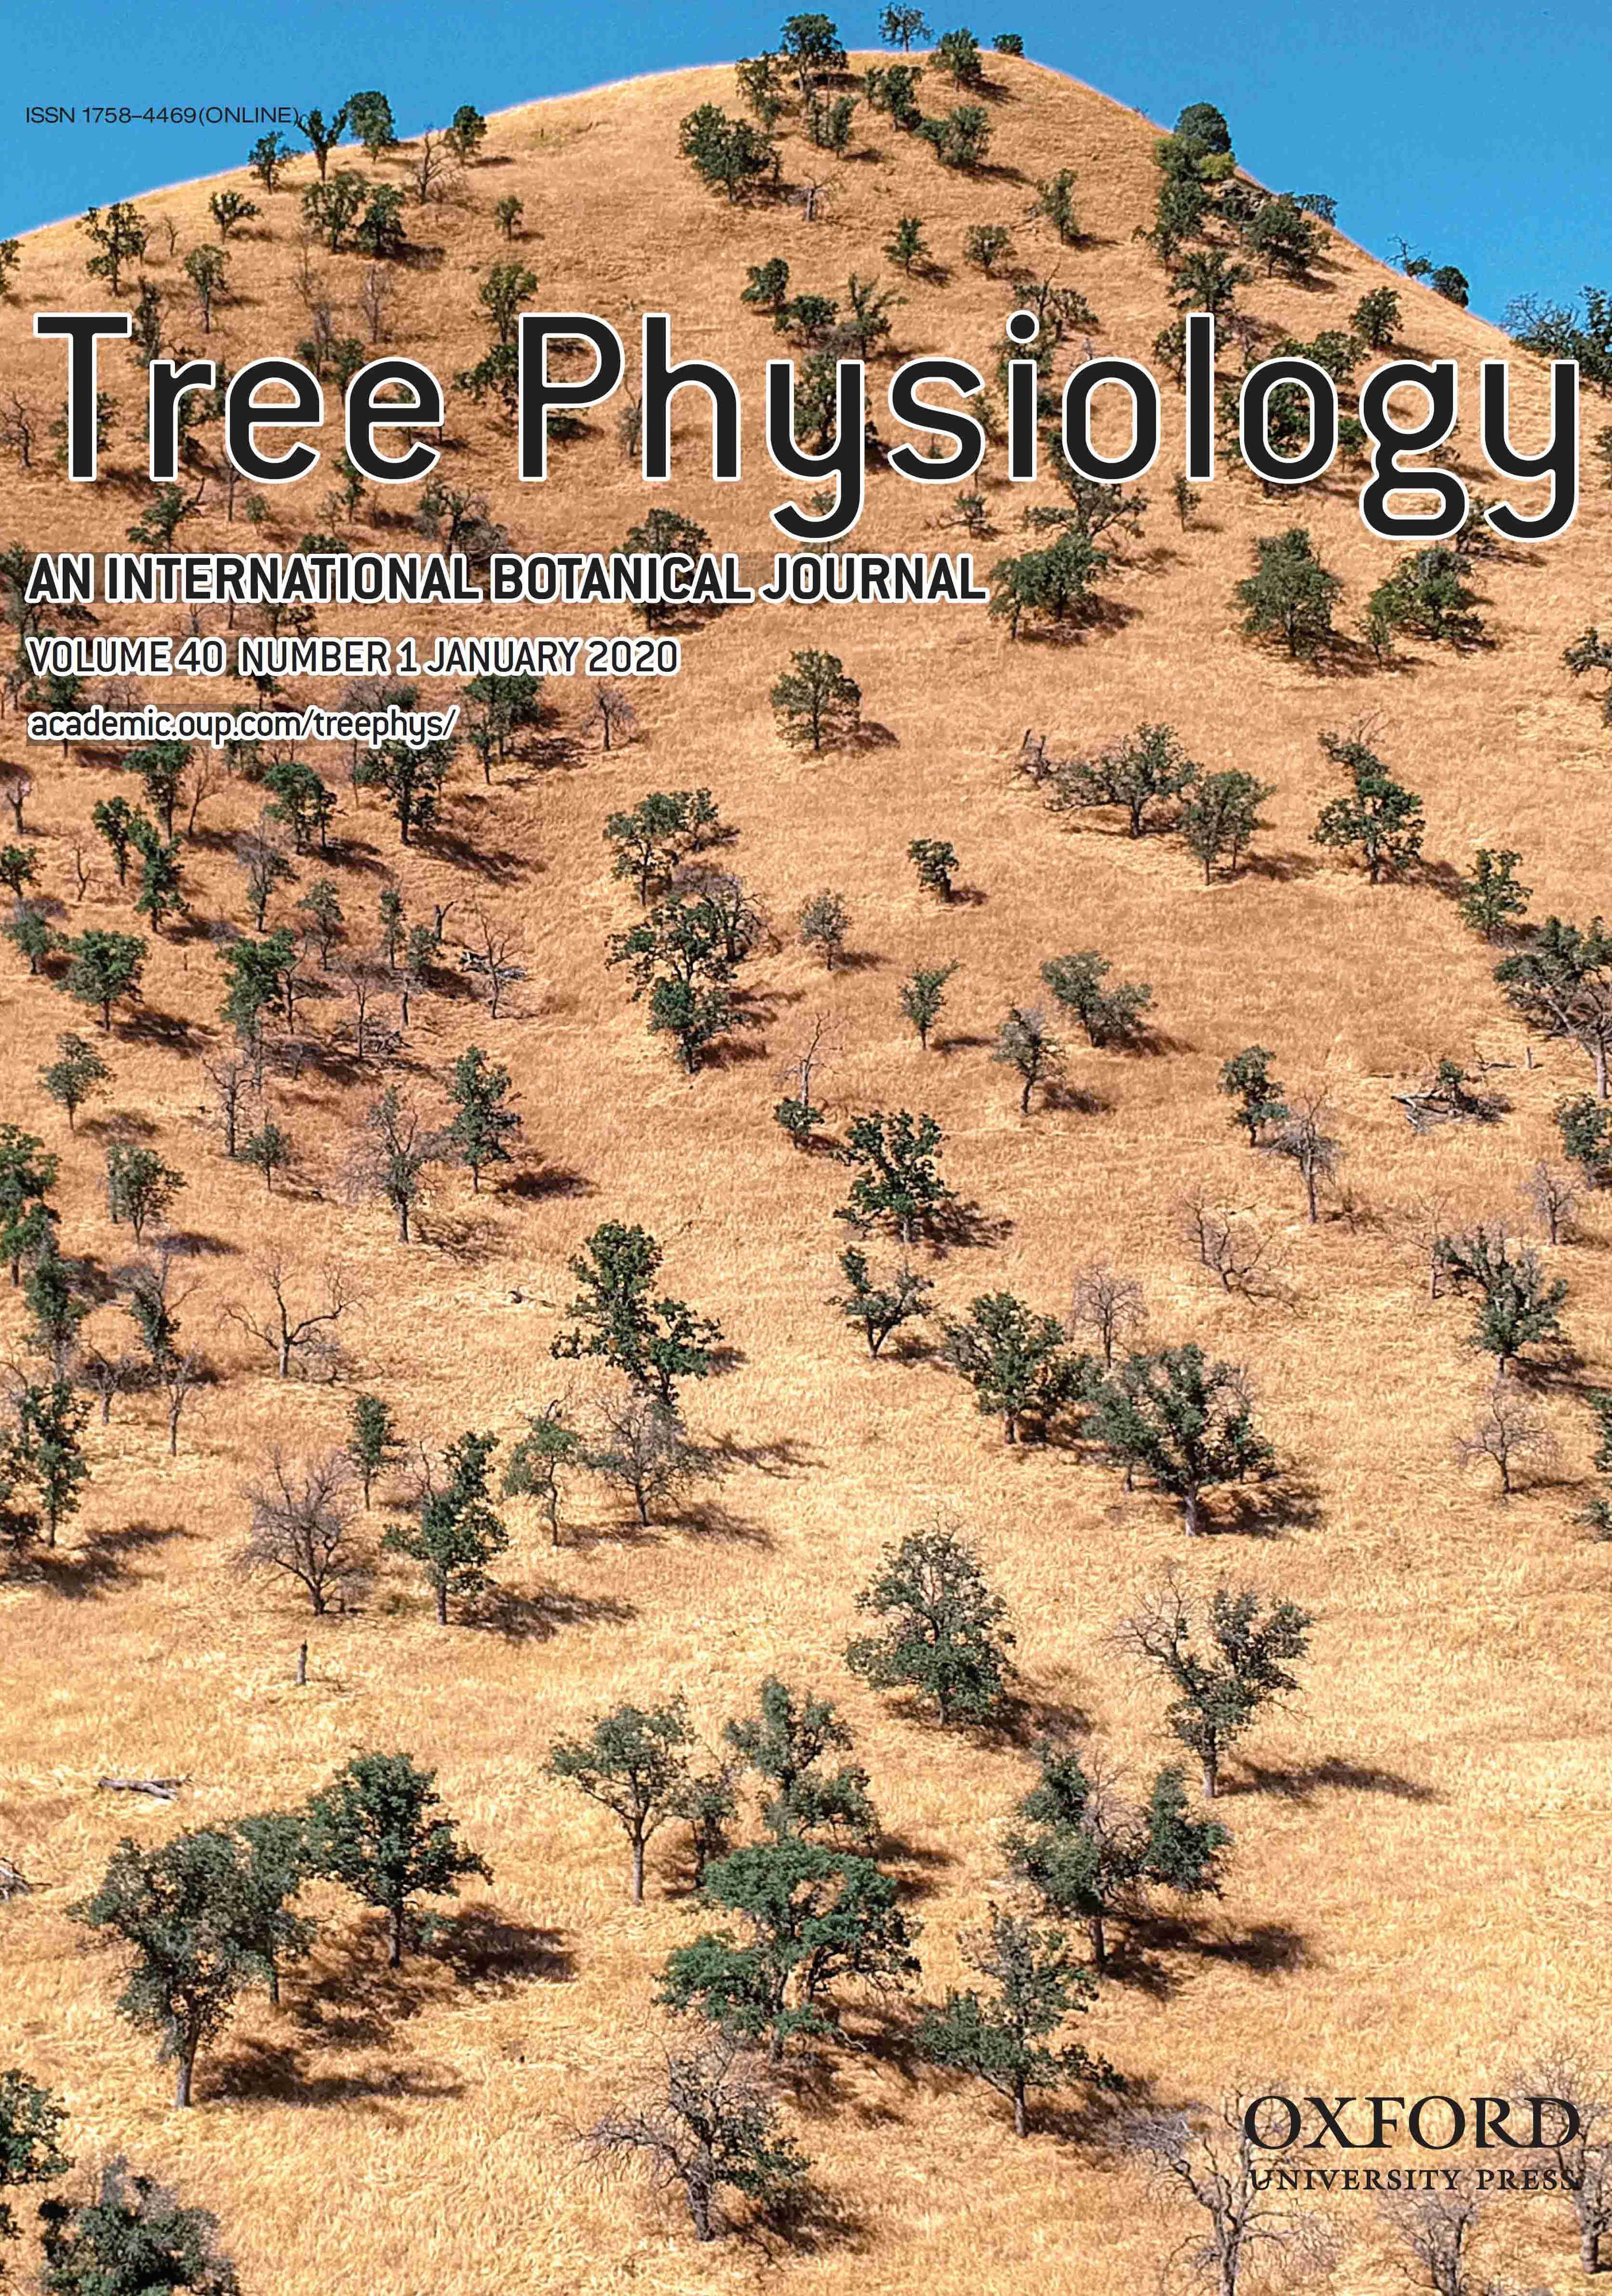 Tree Physiology journal cover Jan 2020